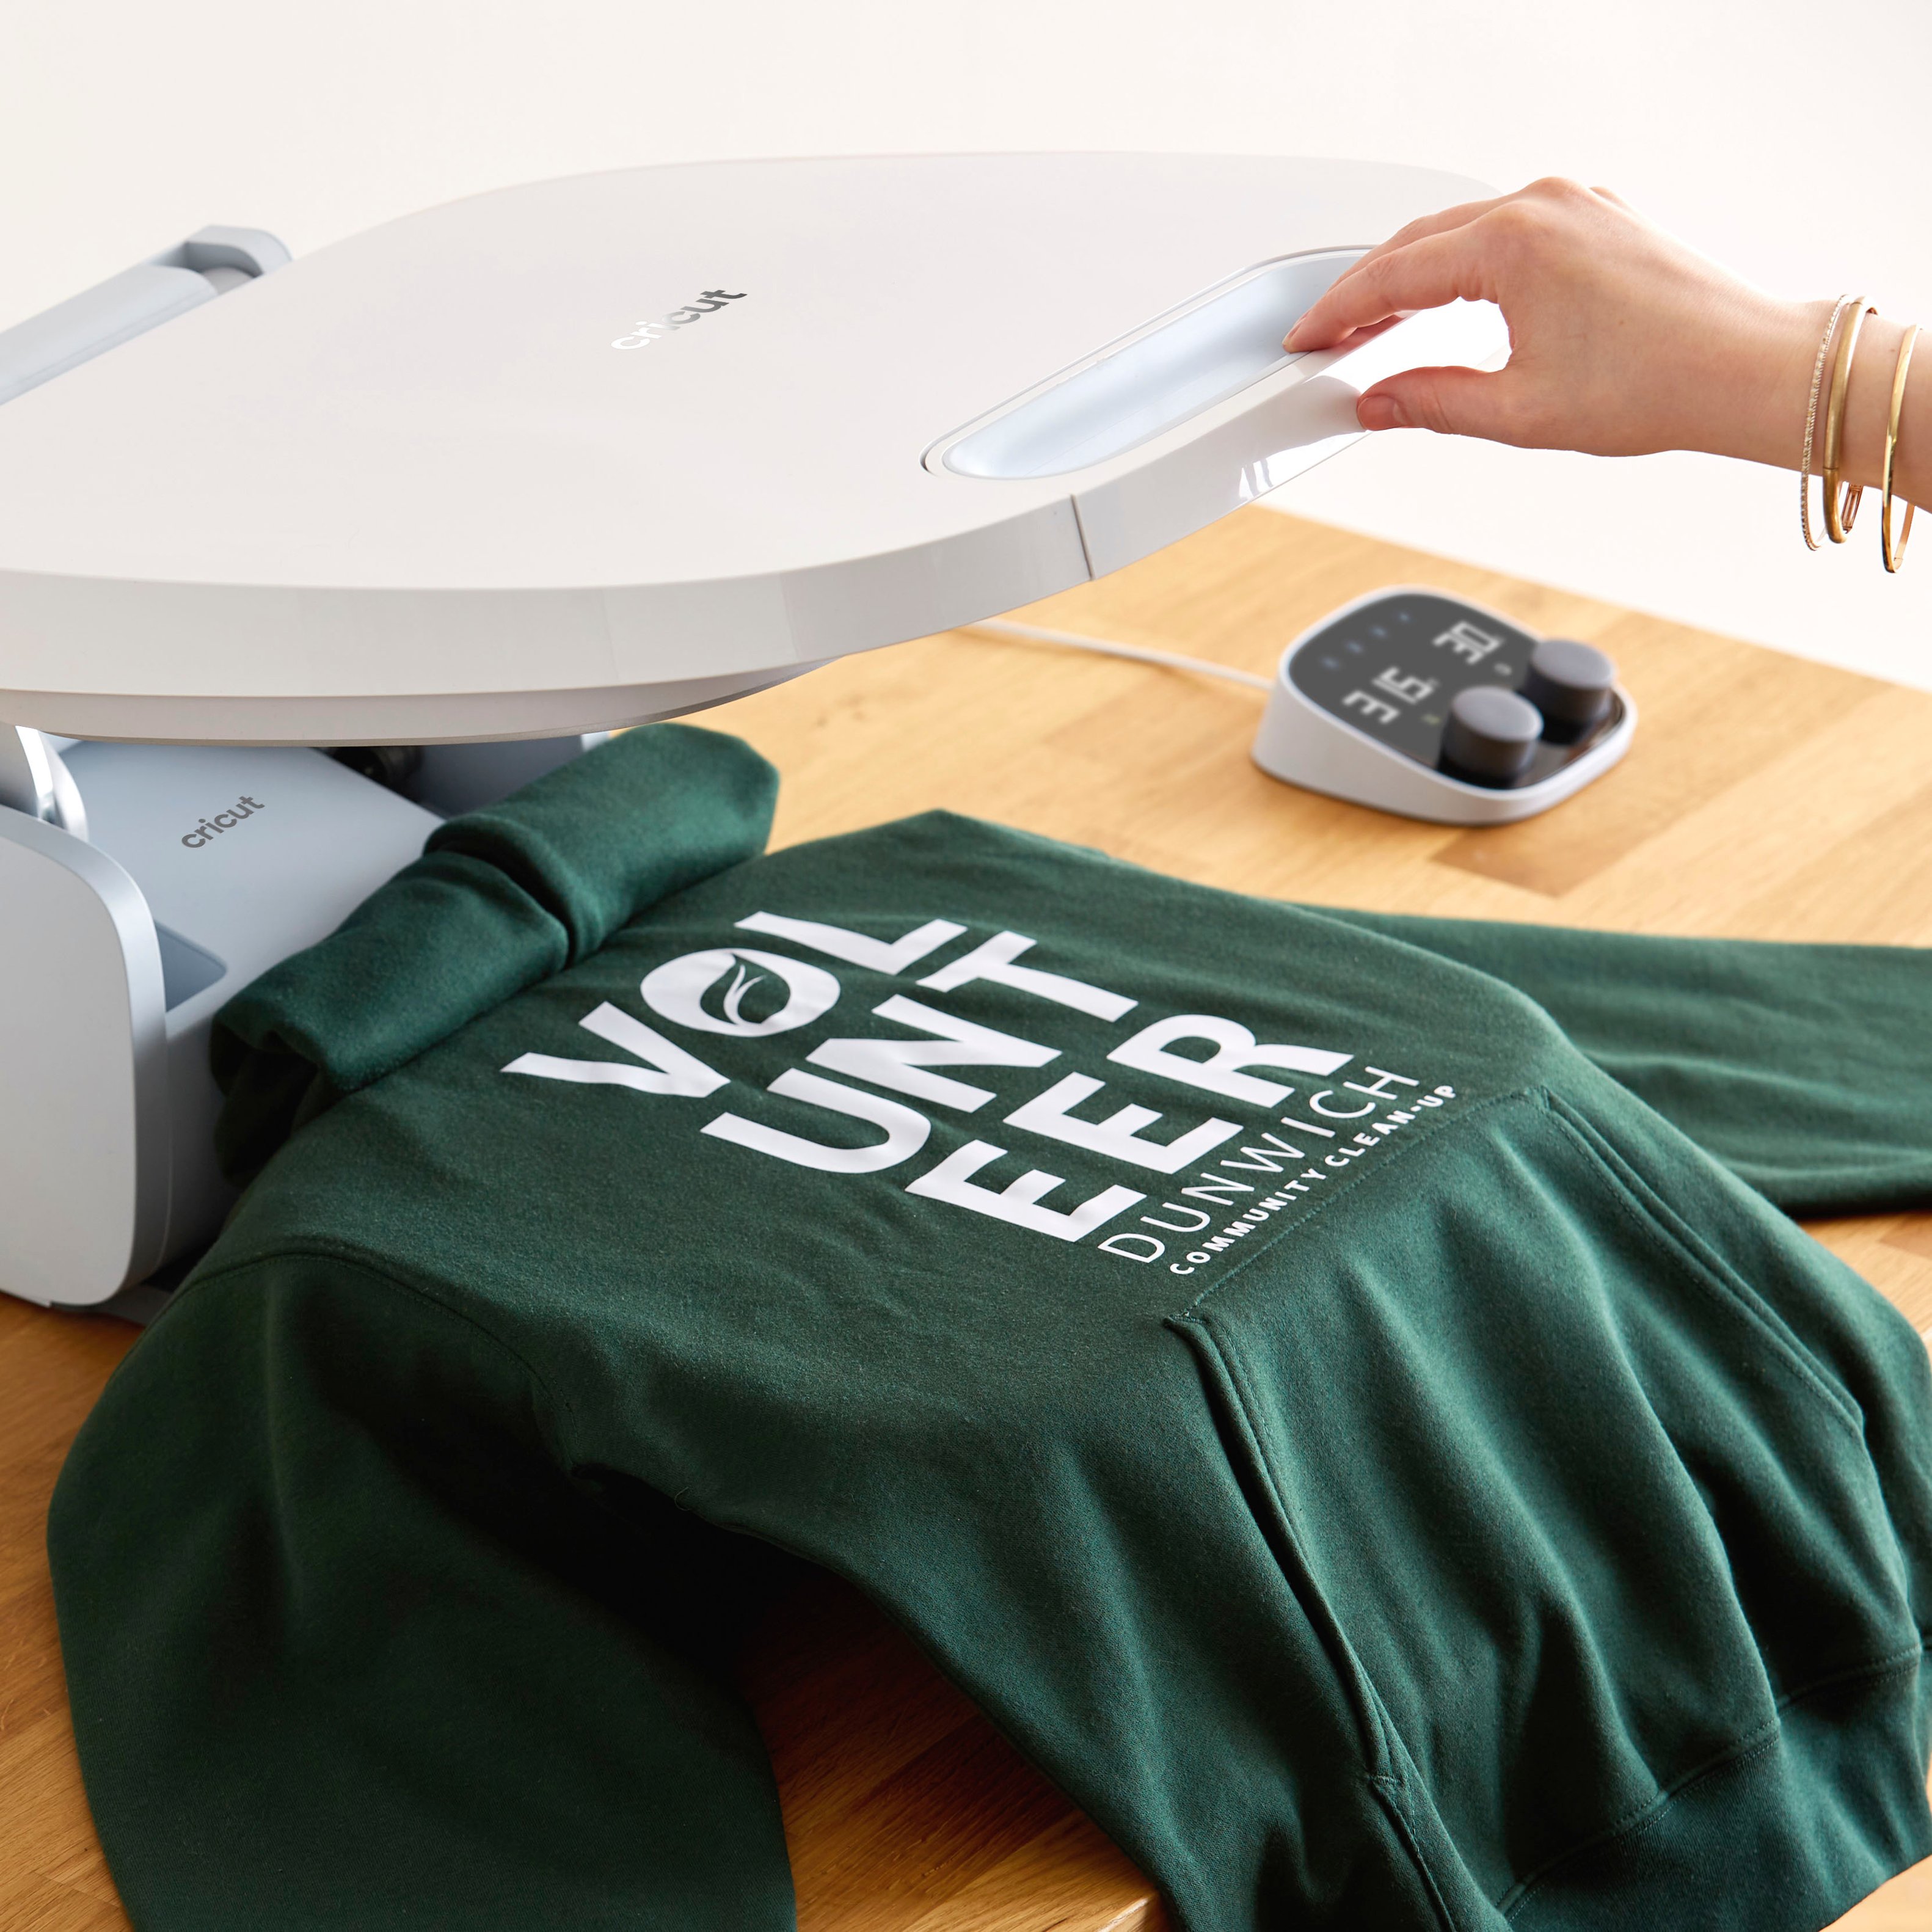 $800 for a glorified heat press? is this actually reasonable pricing? : r/ cricut